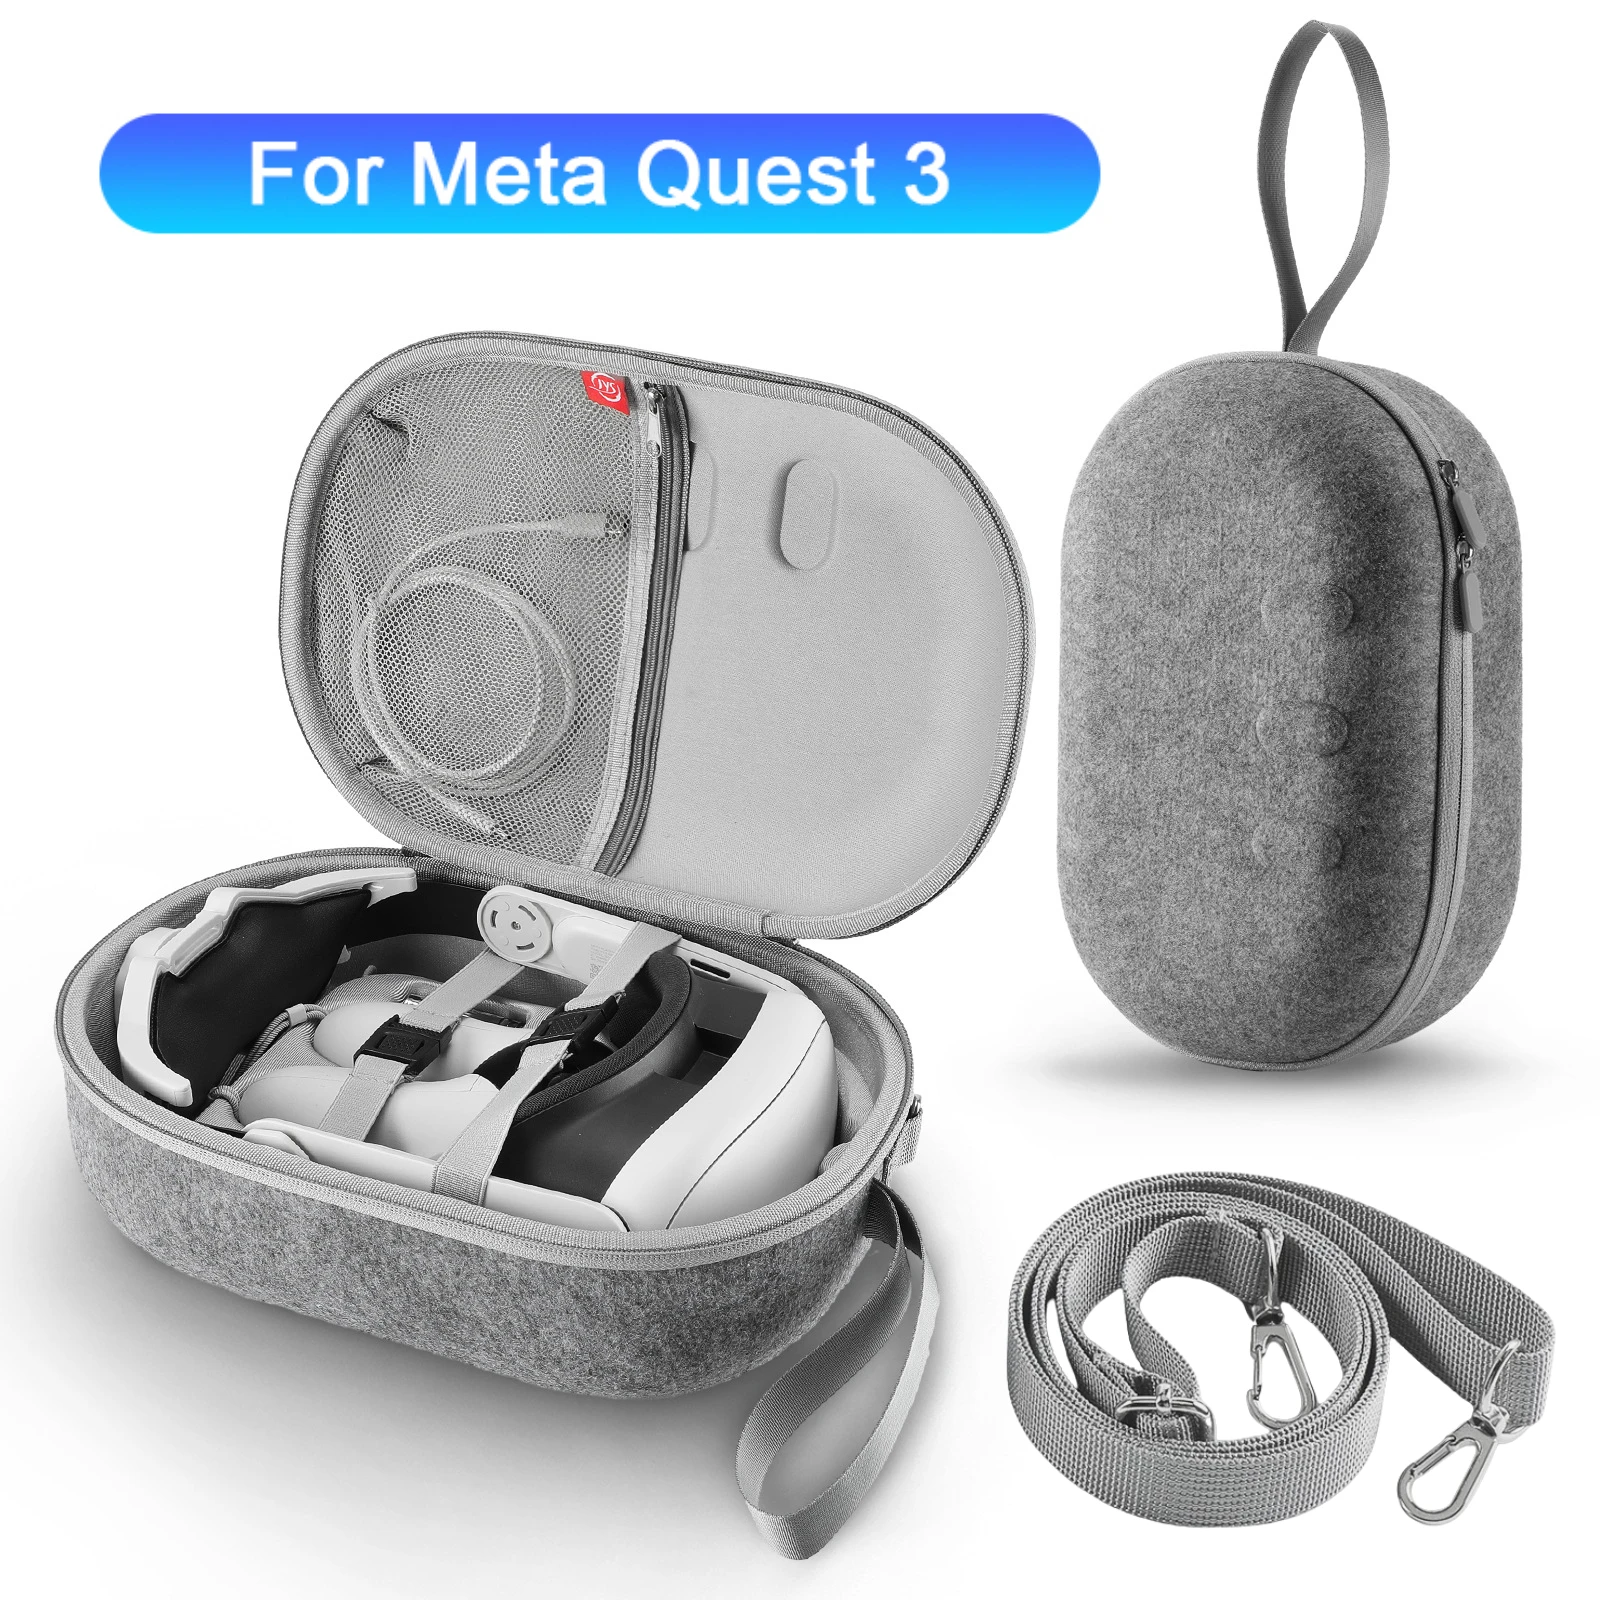 

VR Bag for Meta Quest 3 VR Headset Controllers Carrying Case EVA Travel Storage Bag with Shoulder Strap for Quest 3 Accessories